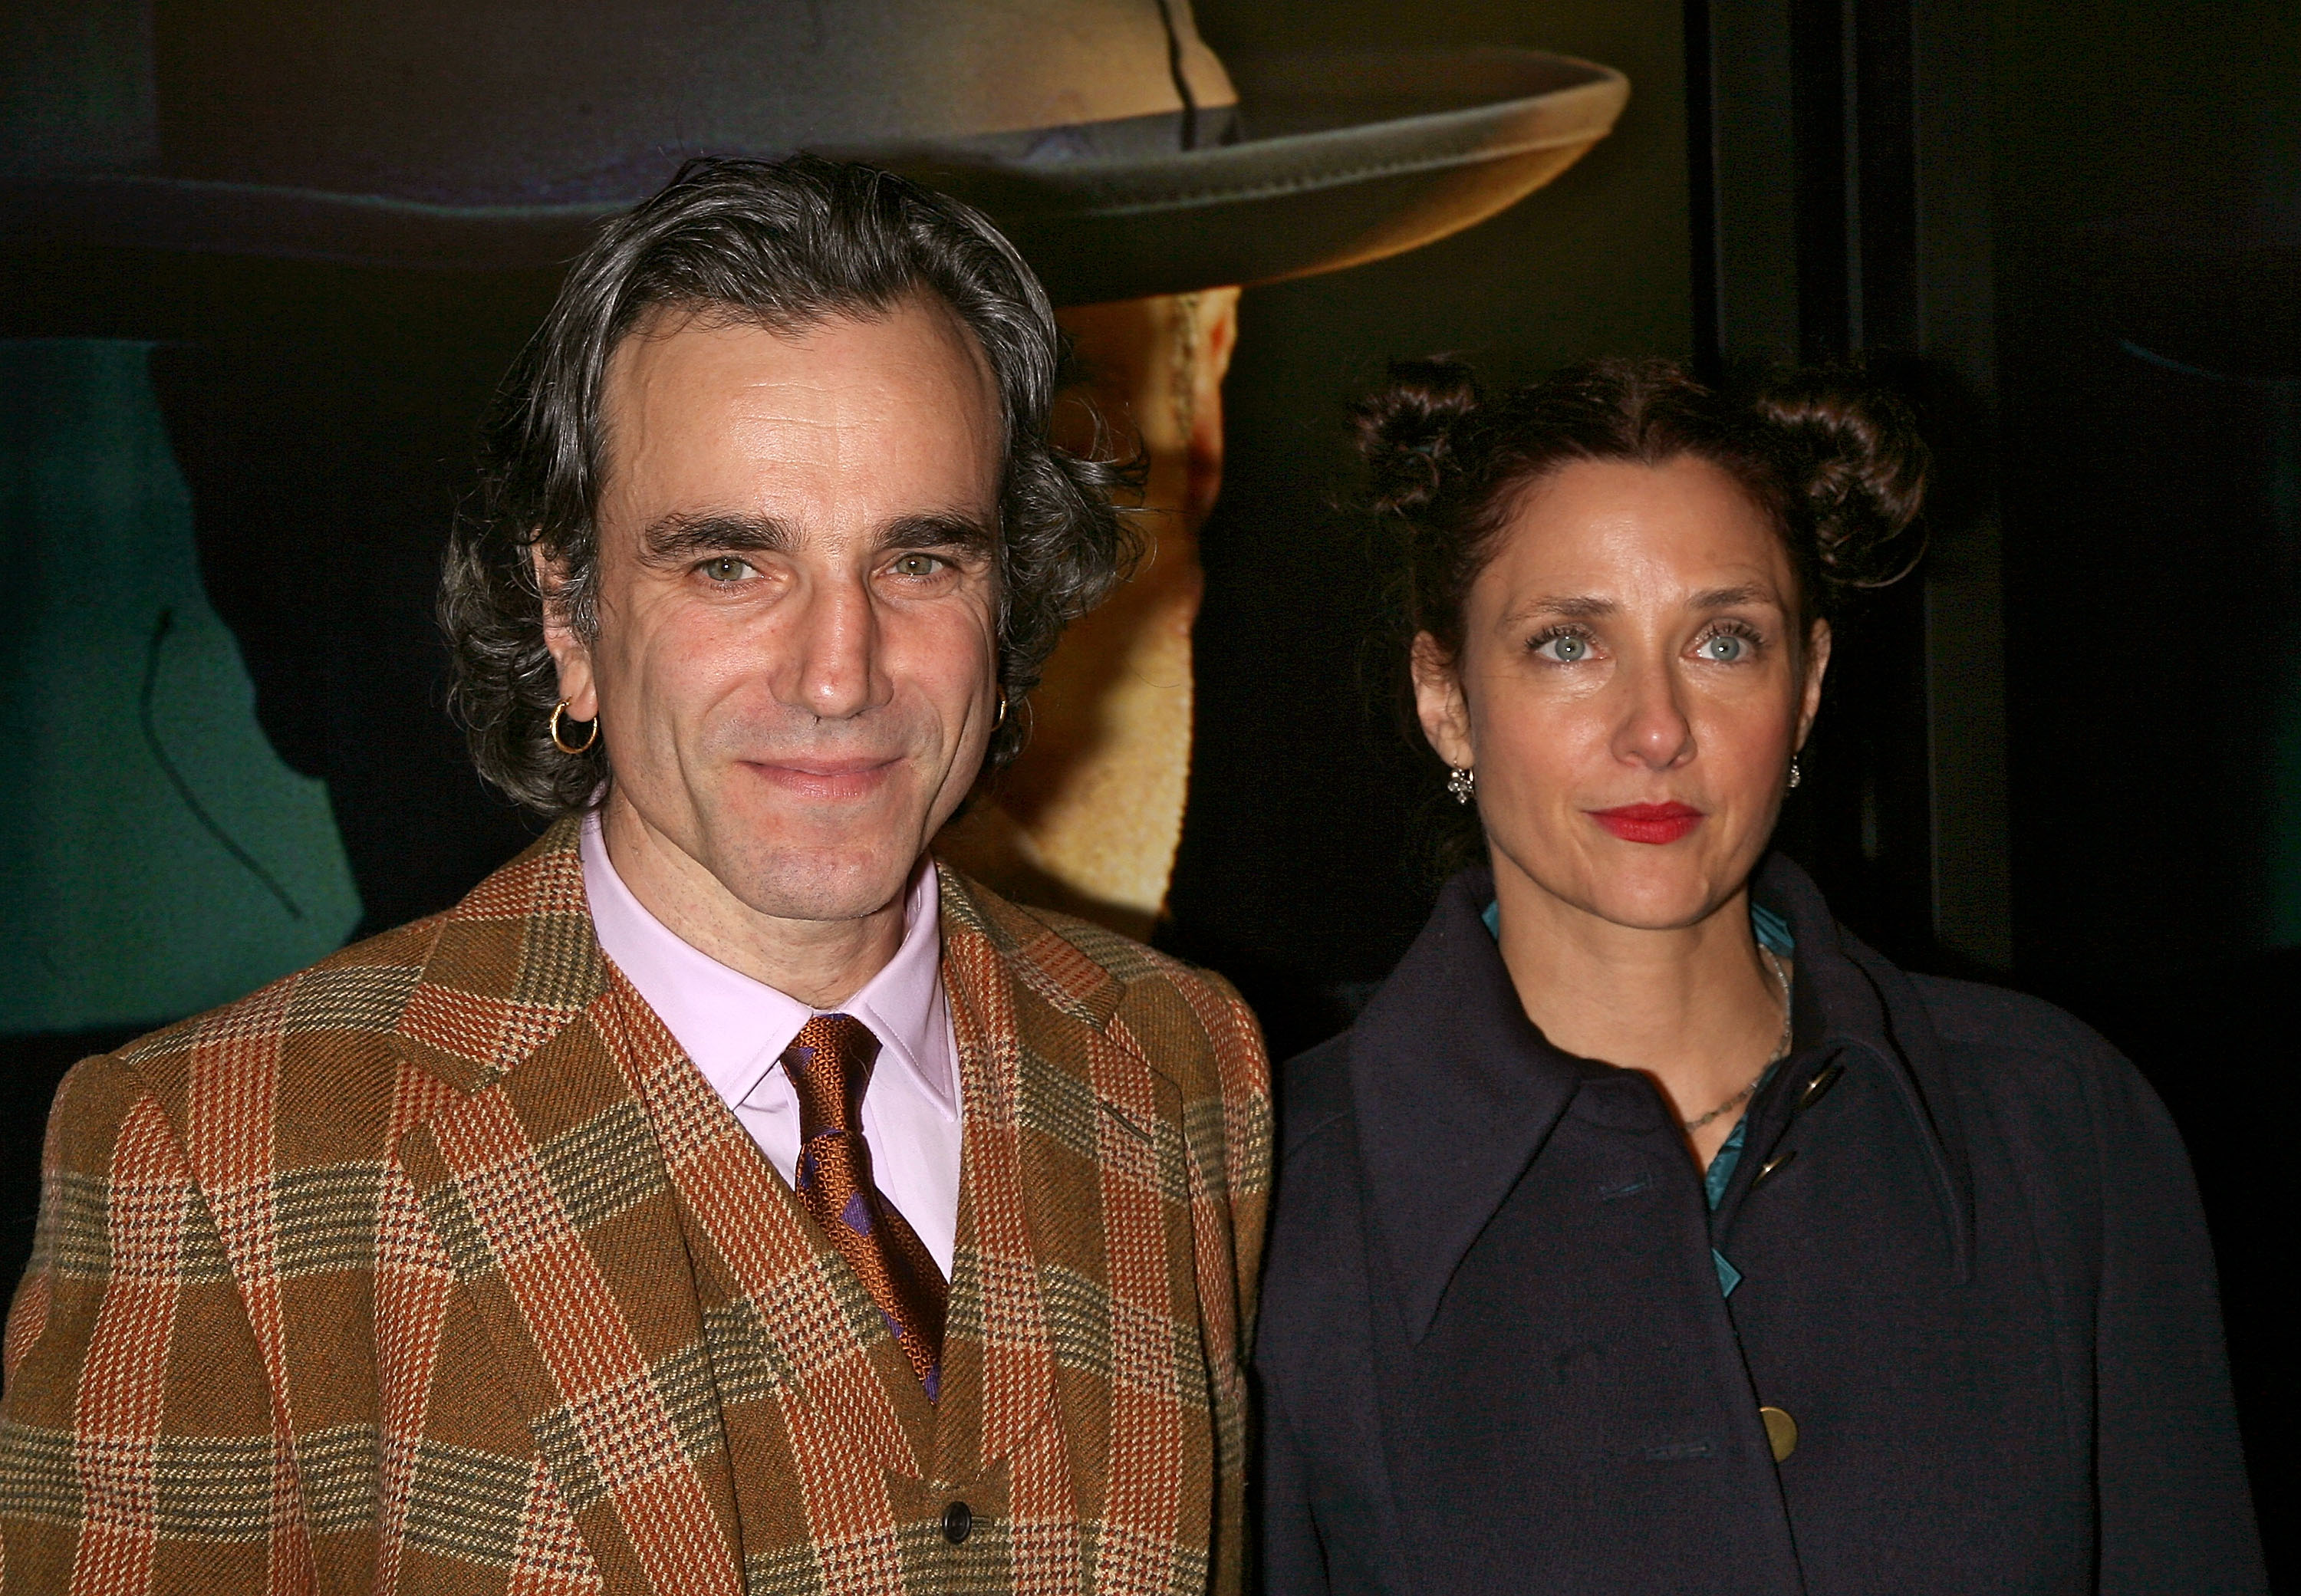 Daniel Day-Lewis and wife Rebecca Miller at the Ziegfeld Theater on December 10, 2007 in New York City. | Source: Getty Images